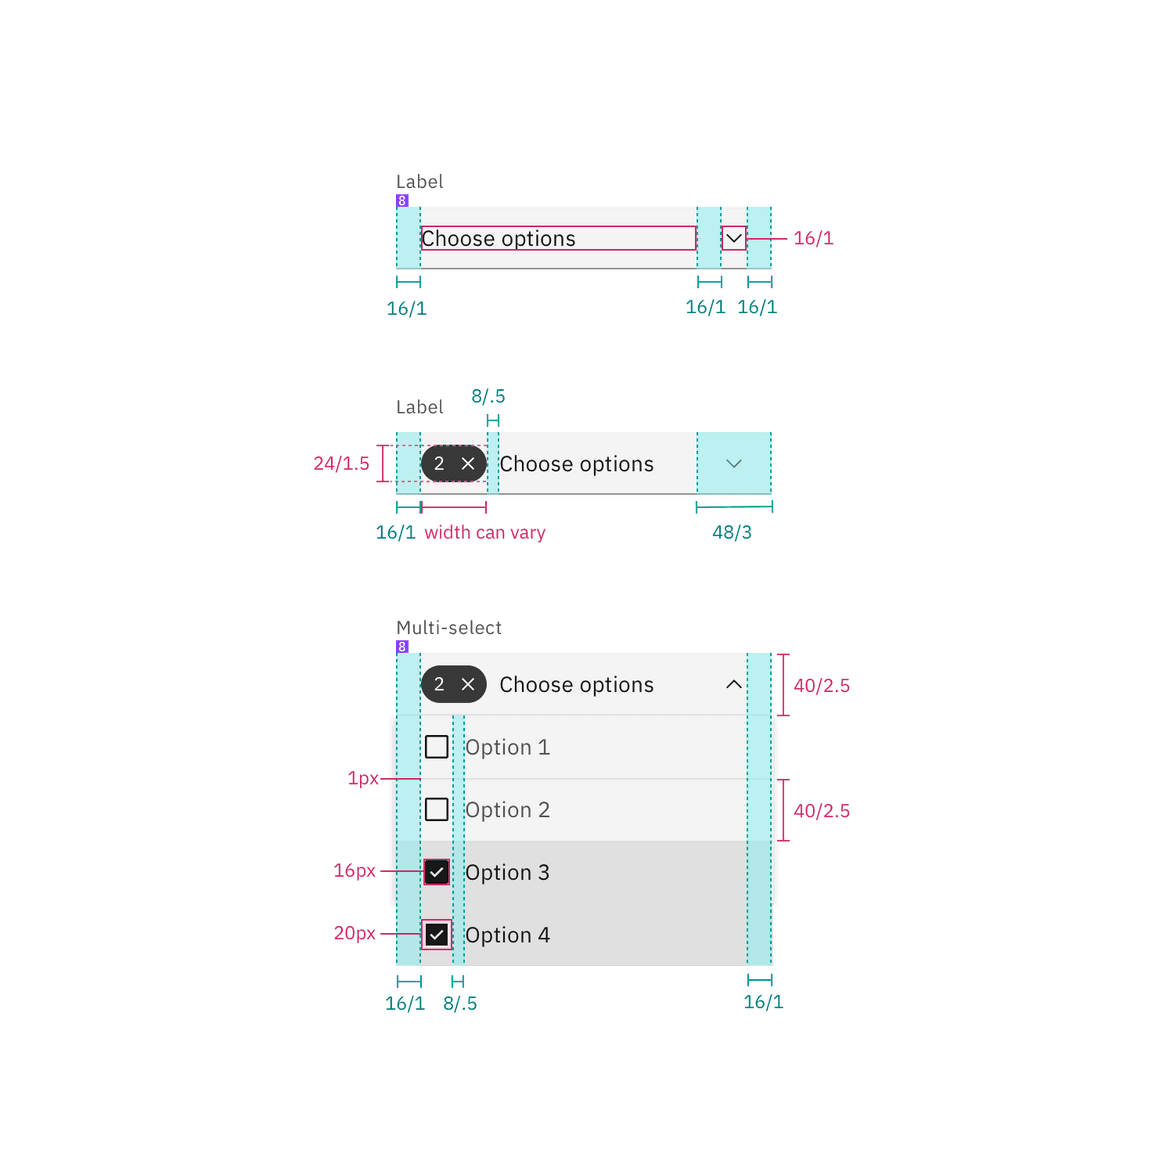 Structure and spacing for a multiselect dropdown